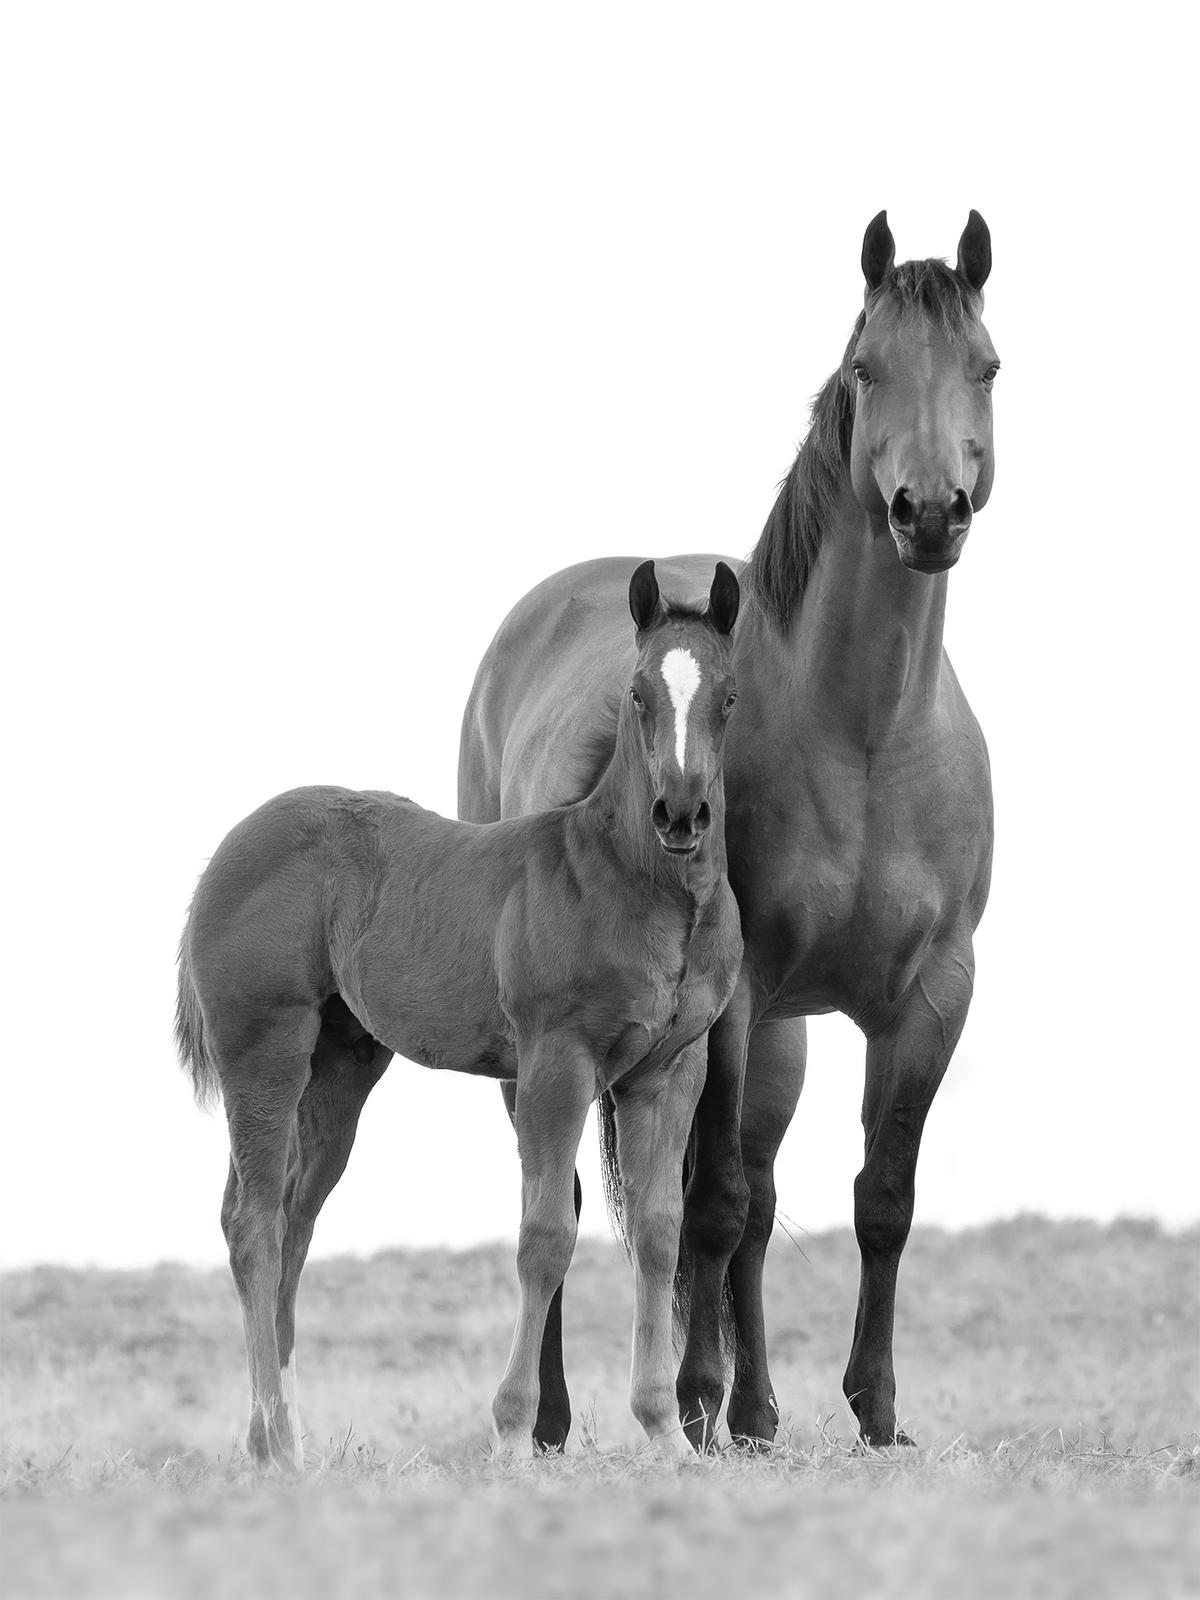 The "Mare and Foal" photo. (Courtesy of <a href="https://www.instagram.com/tonymendesphotography/">Tony Mendes</a>)